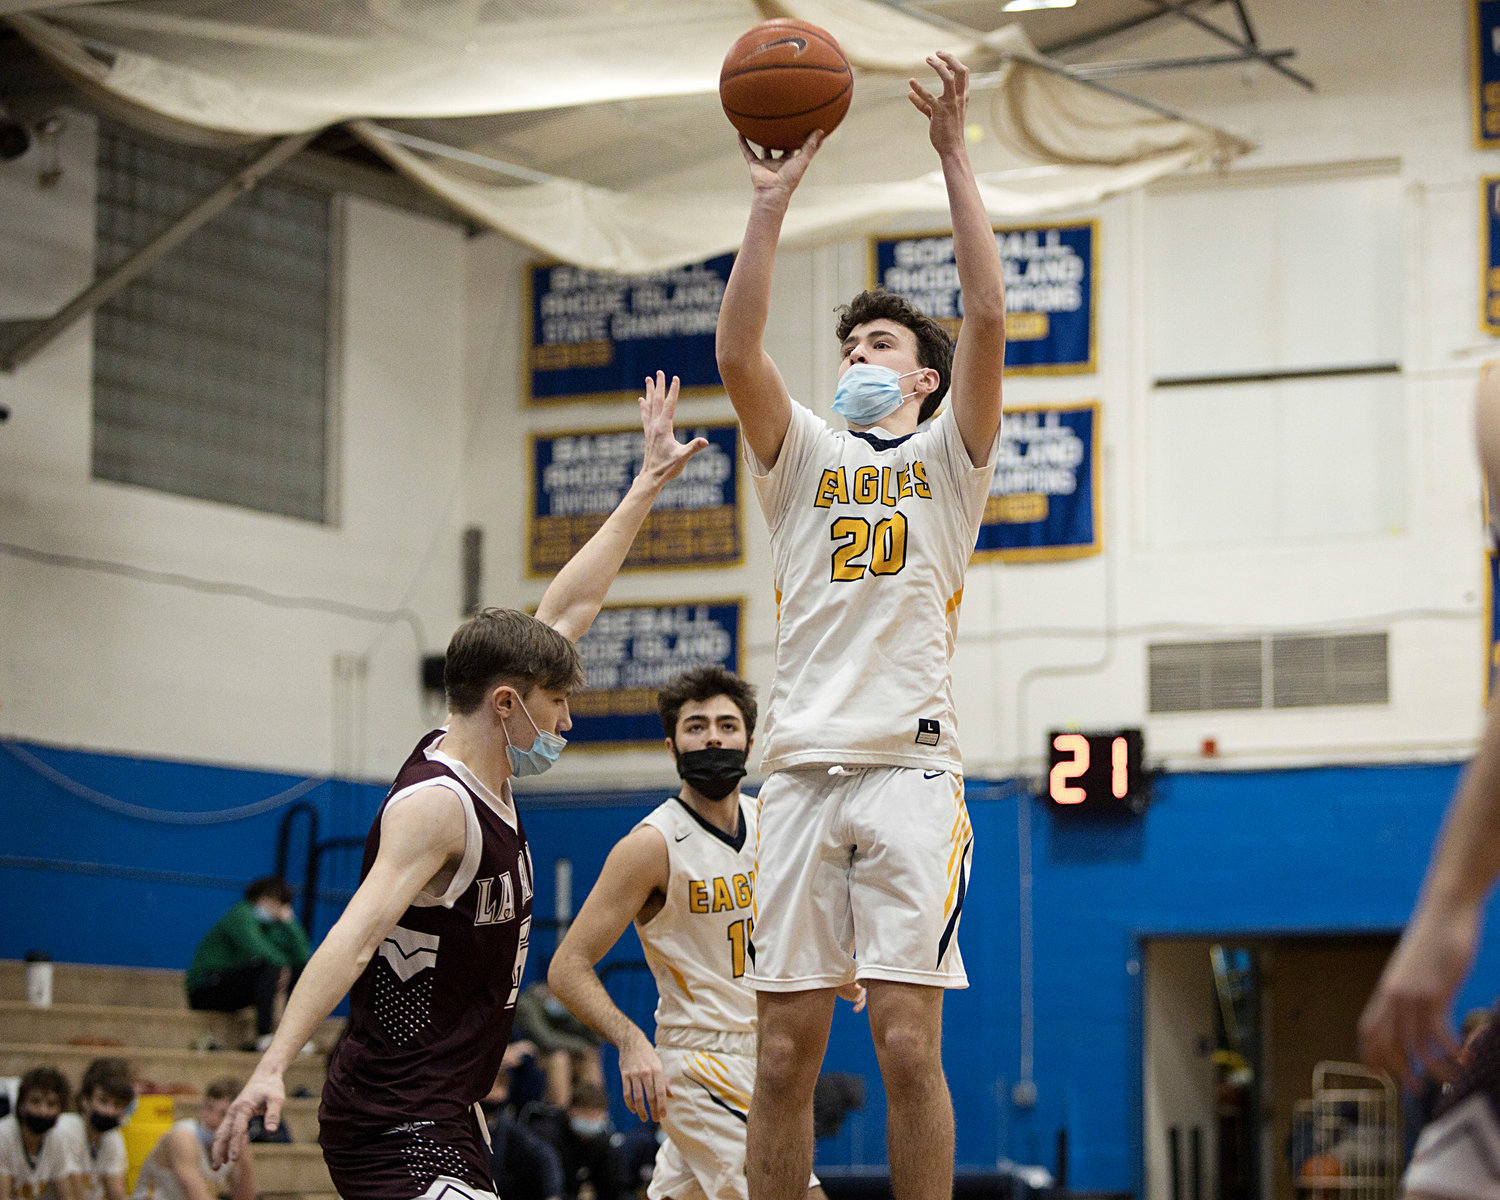 Nick Scandura shoots for three early, in the first half of Monday's game against LaSalle.